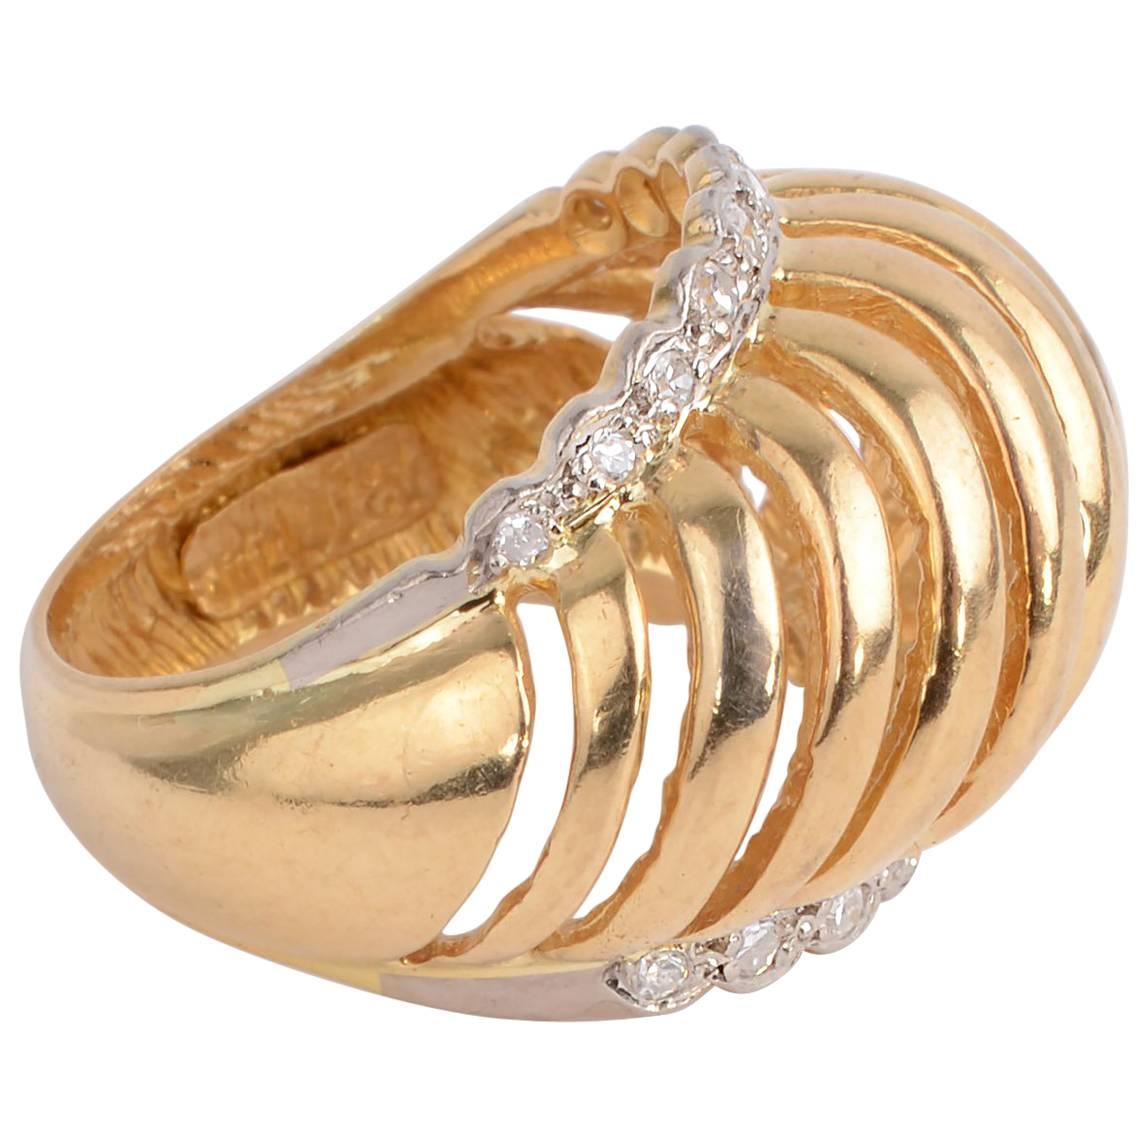 Lalaounis Domed Gold Ring with Diamonds